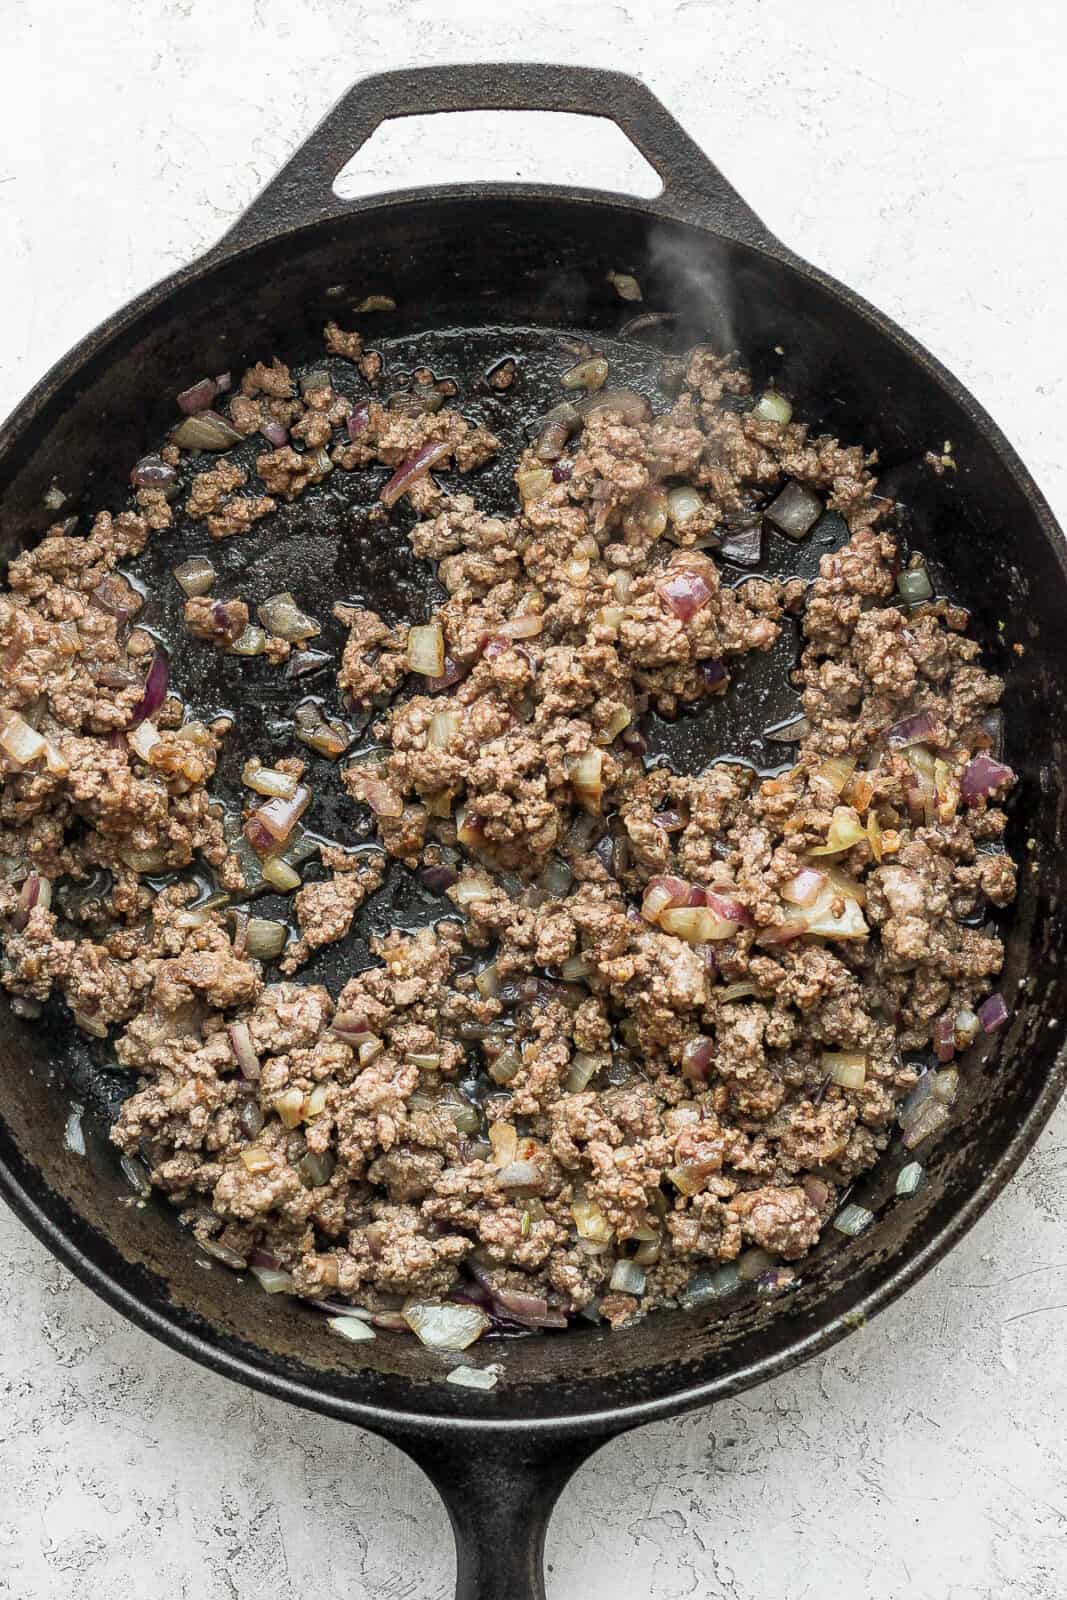 Garlic, onion, and ground beef browned in the pan.